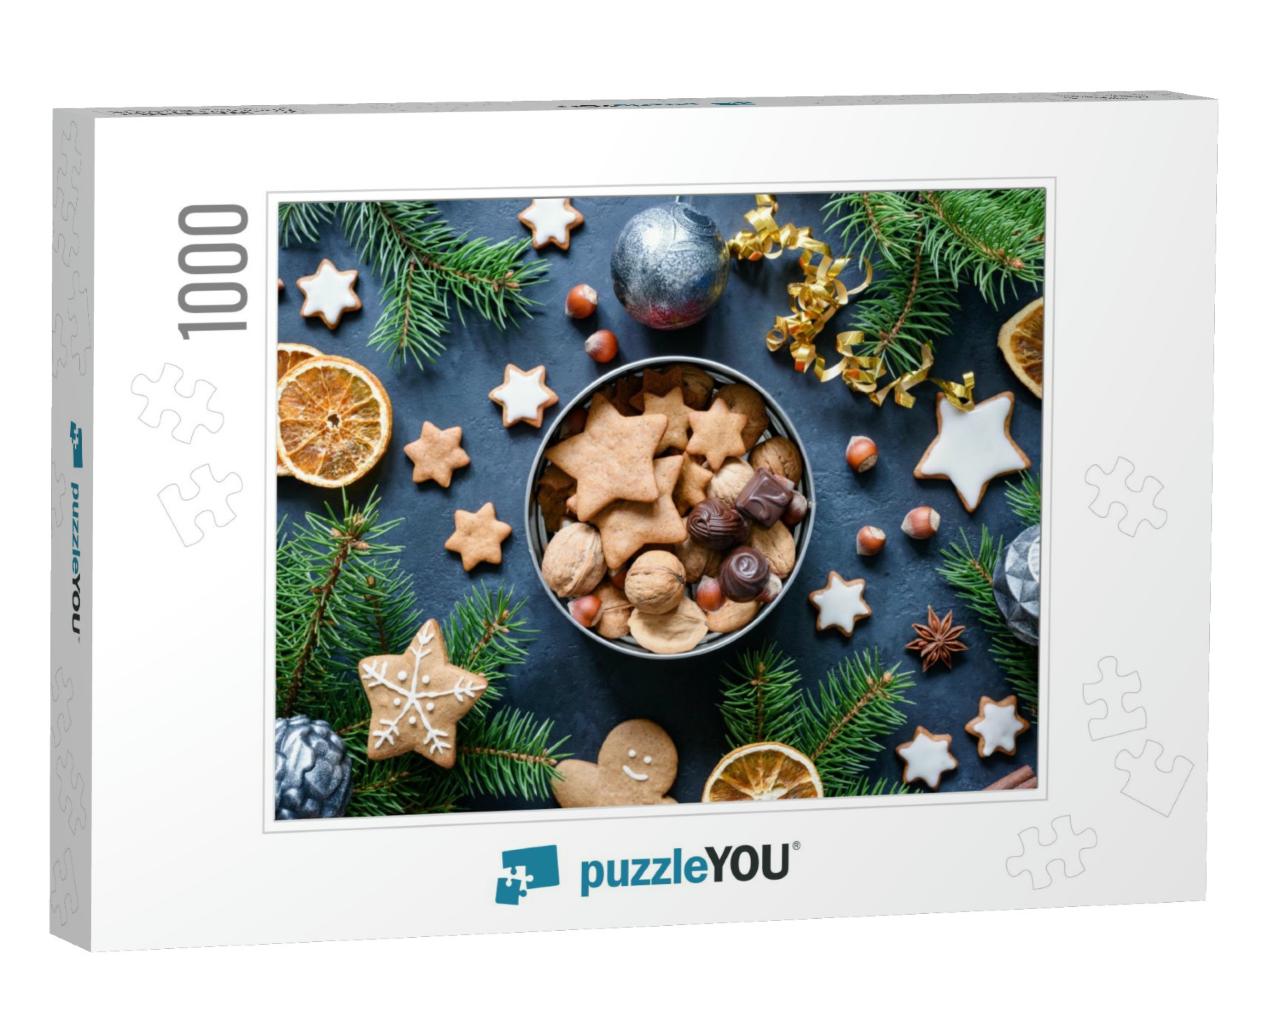 Christmas Gift Box with Homemade Gingerbread Cookies, Nut... Jigsaw Puzzle with 1000 pieces